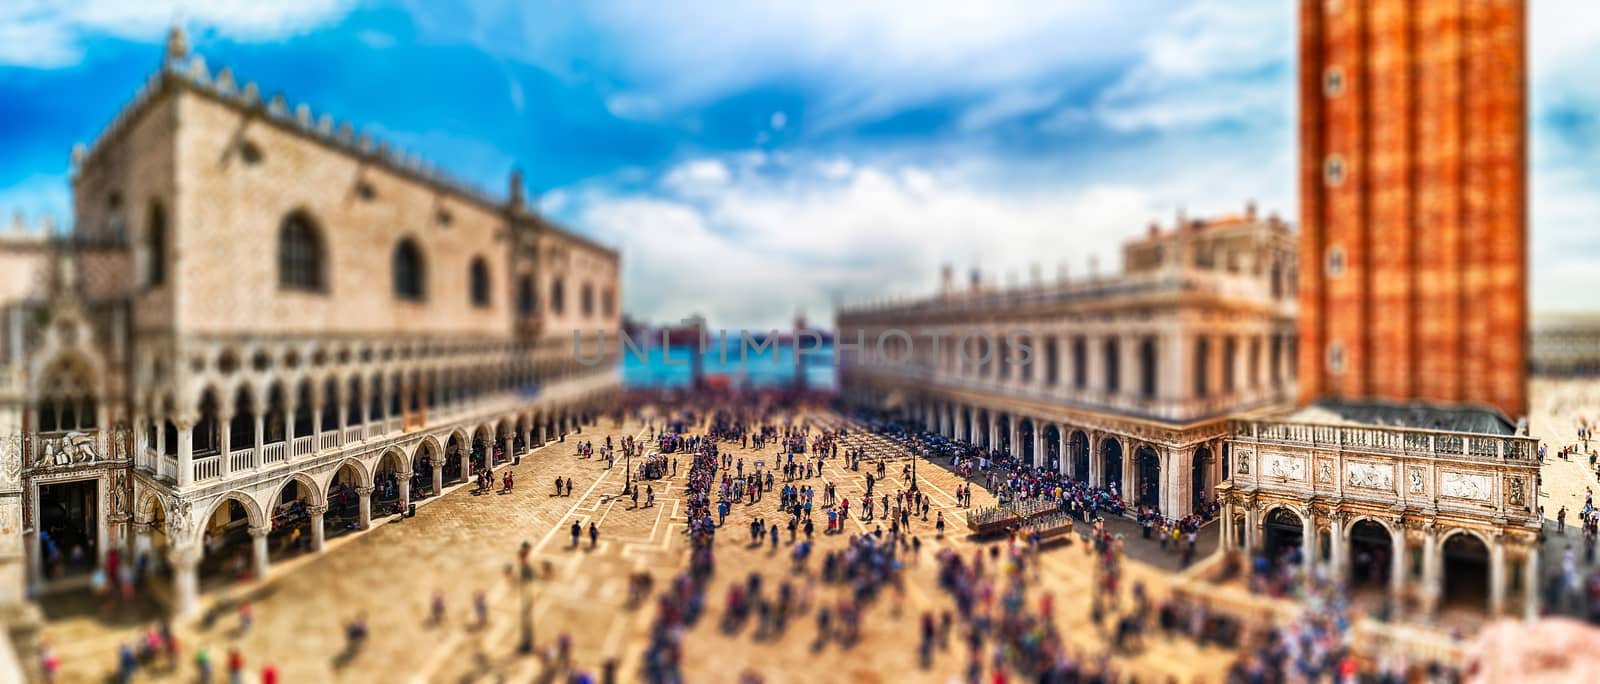 Panoramic aerial view of St. Mark's Square, Venice, Italy by marcorubino